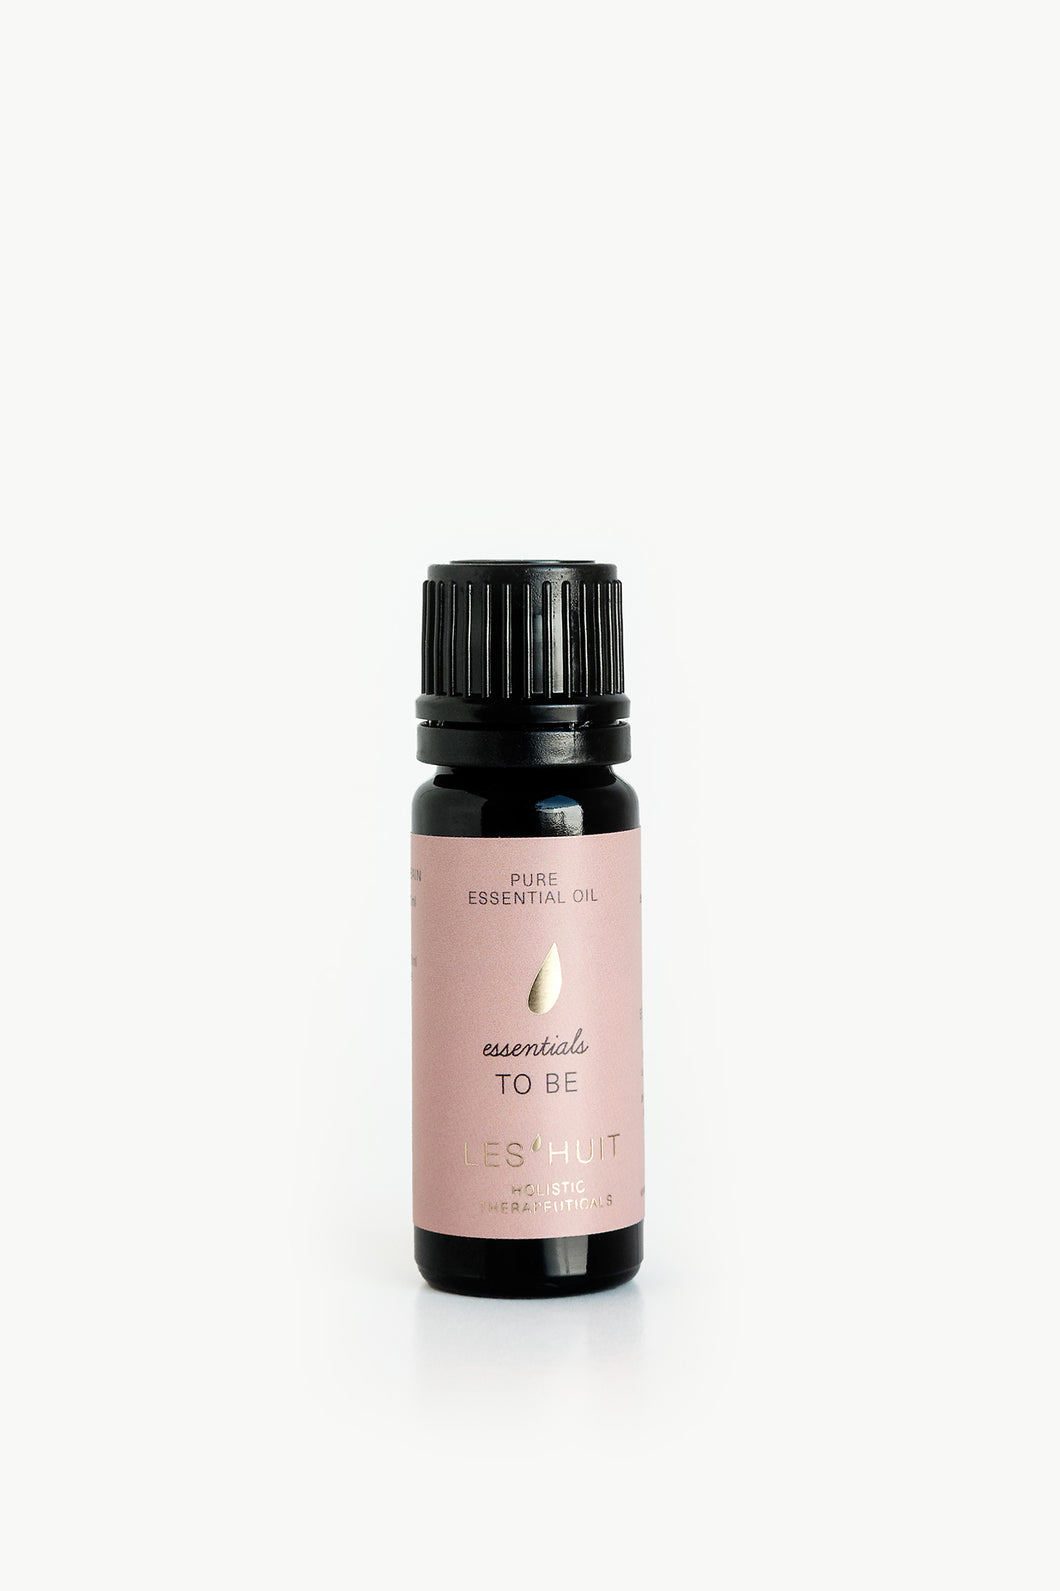 Les Huit  Pure essential oil N°1 – To Be